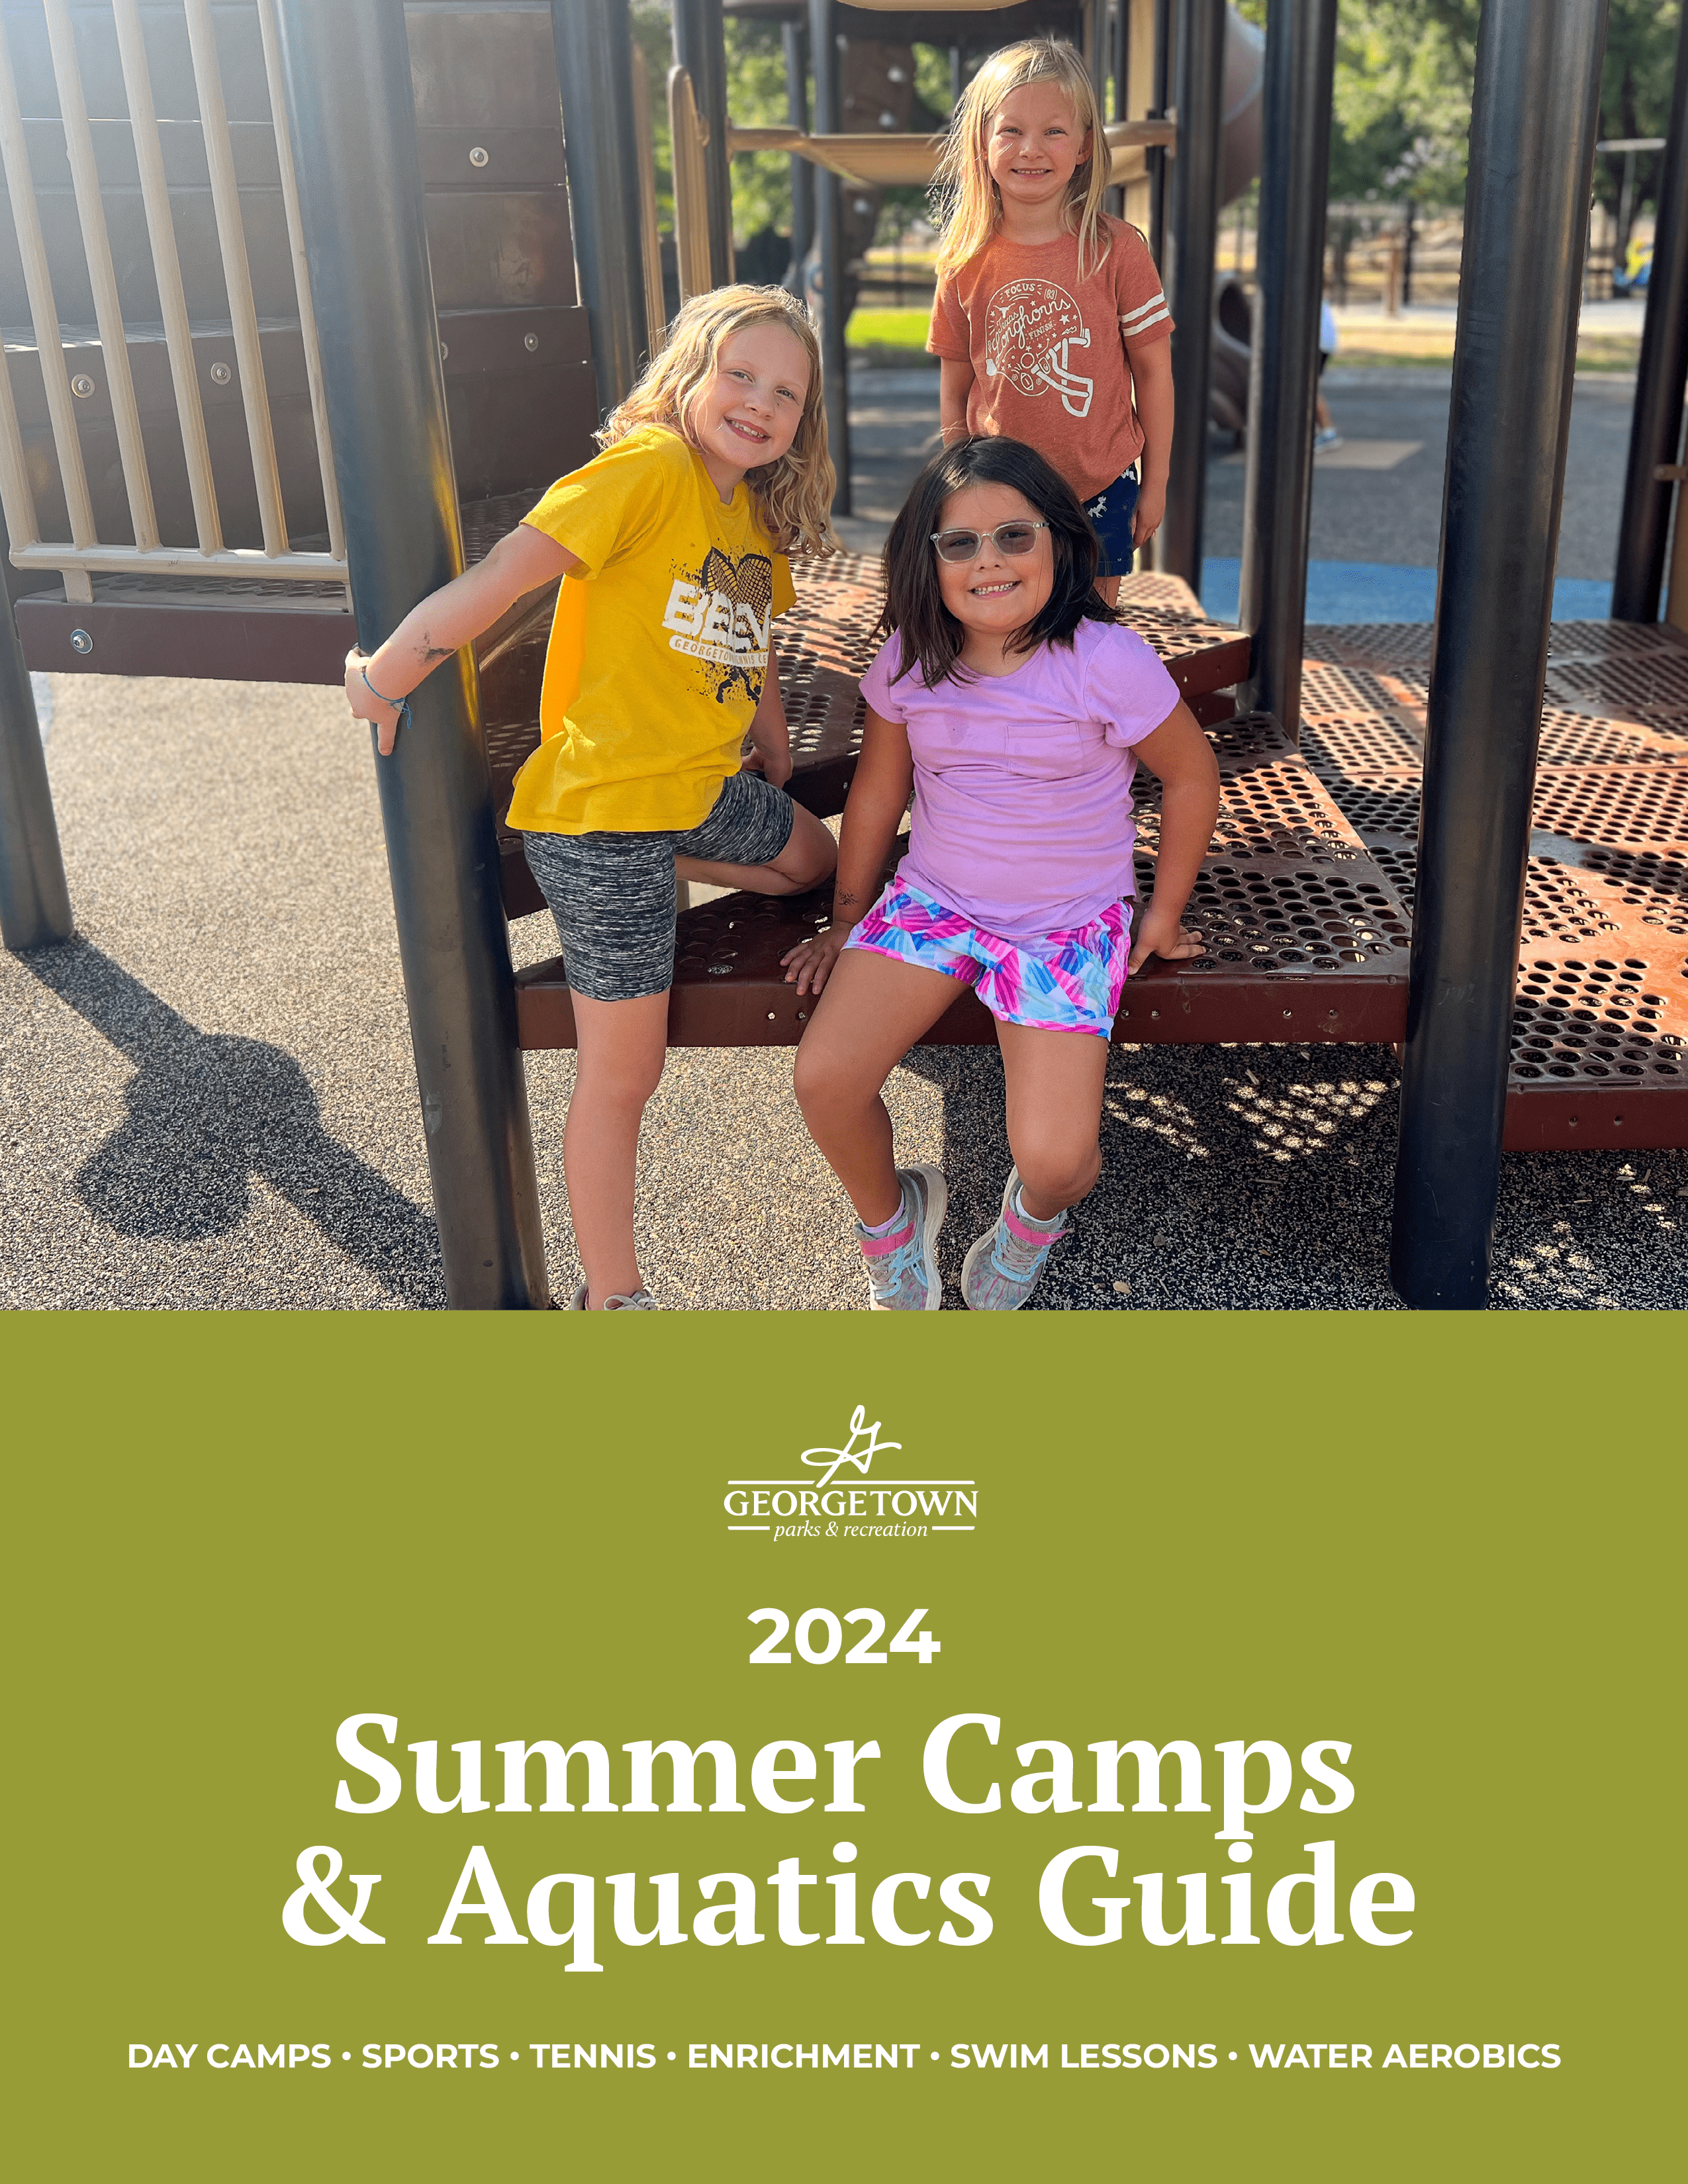 Live and Play Georgetown Summer Camps and Aquatics Guide 2024